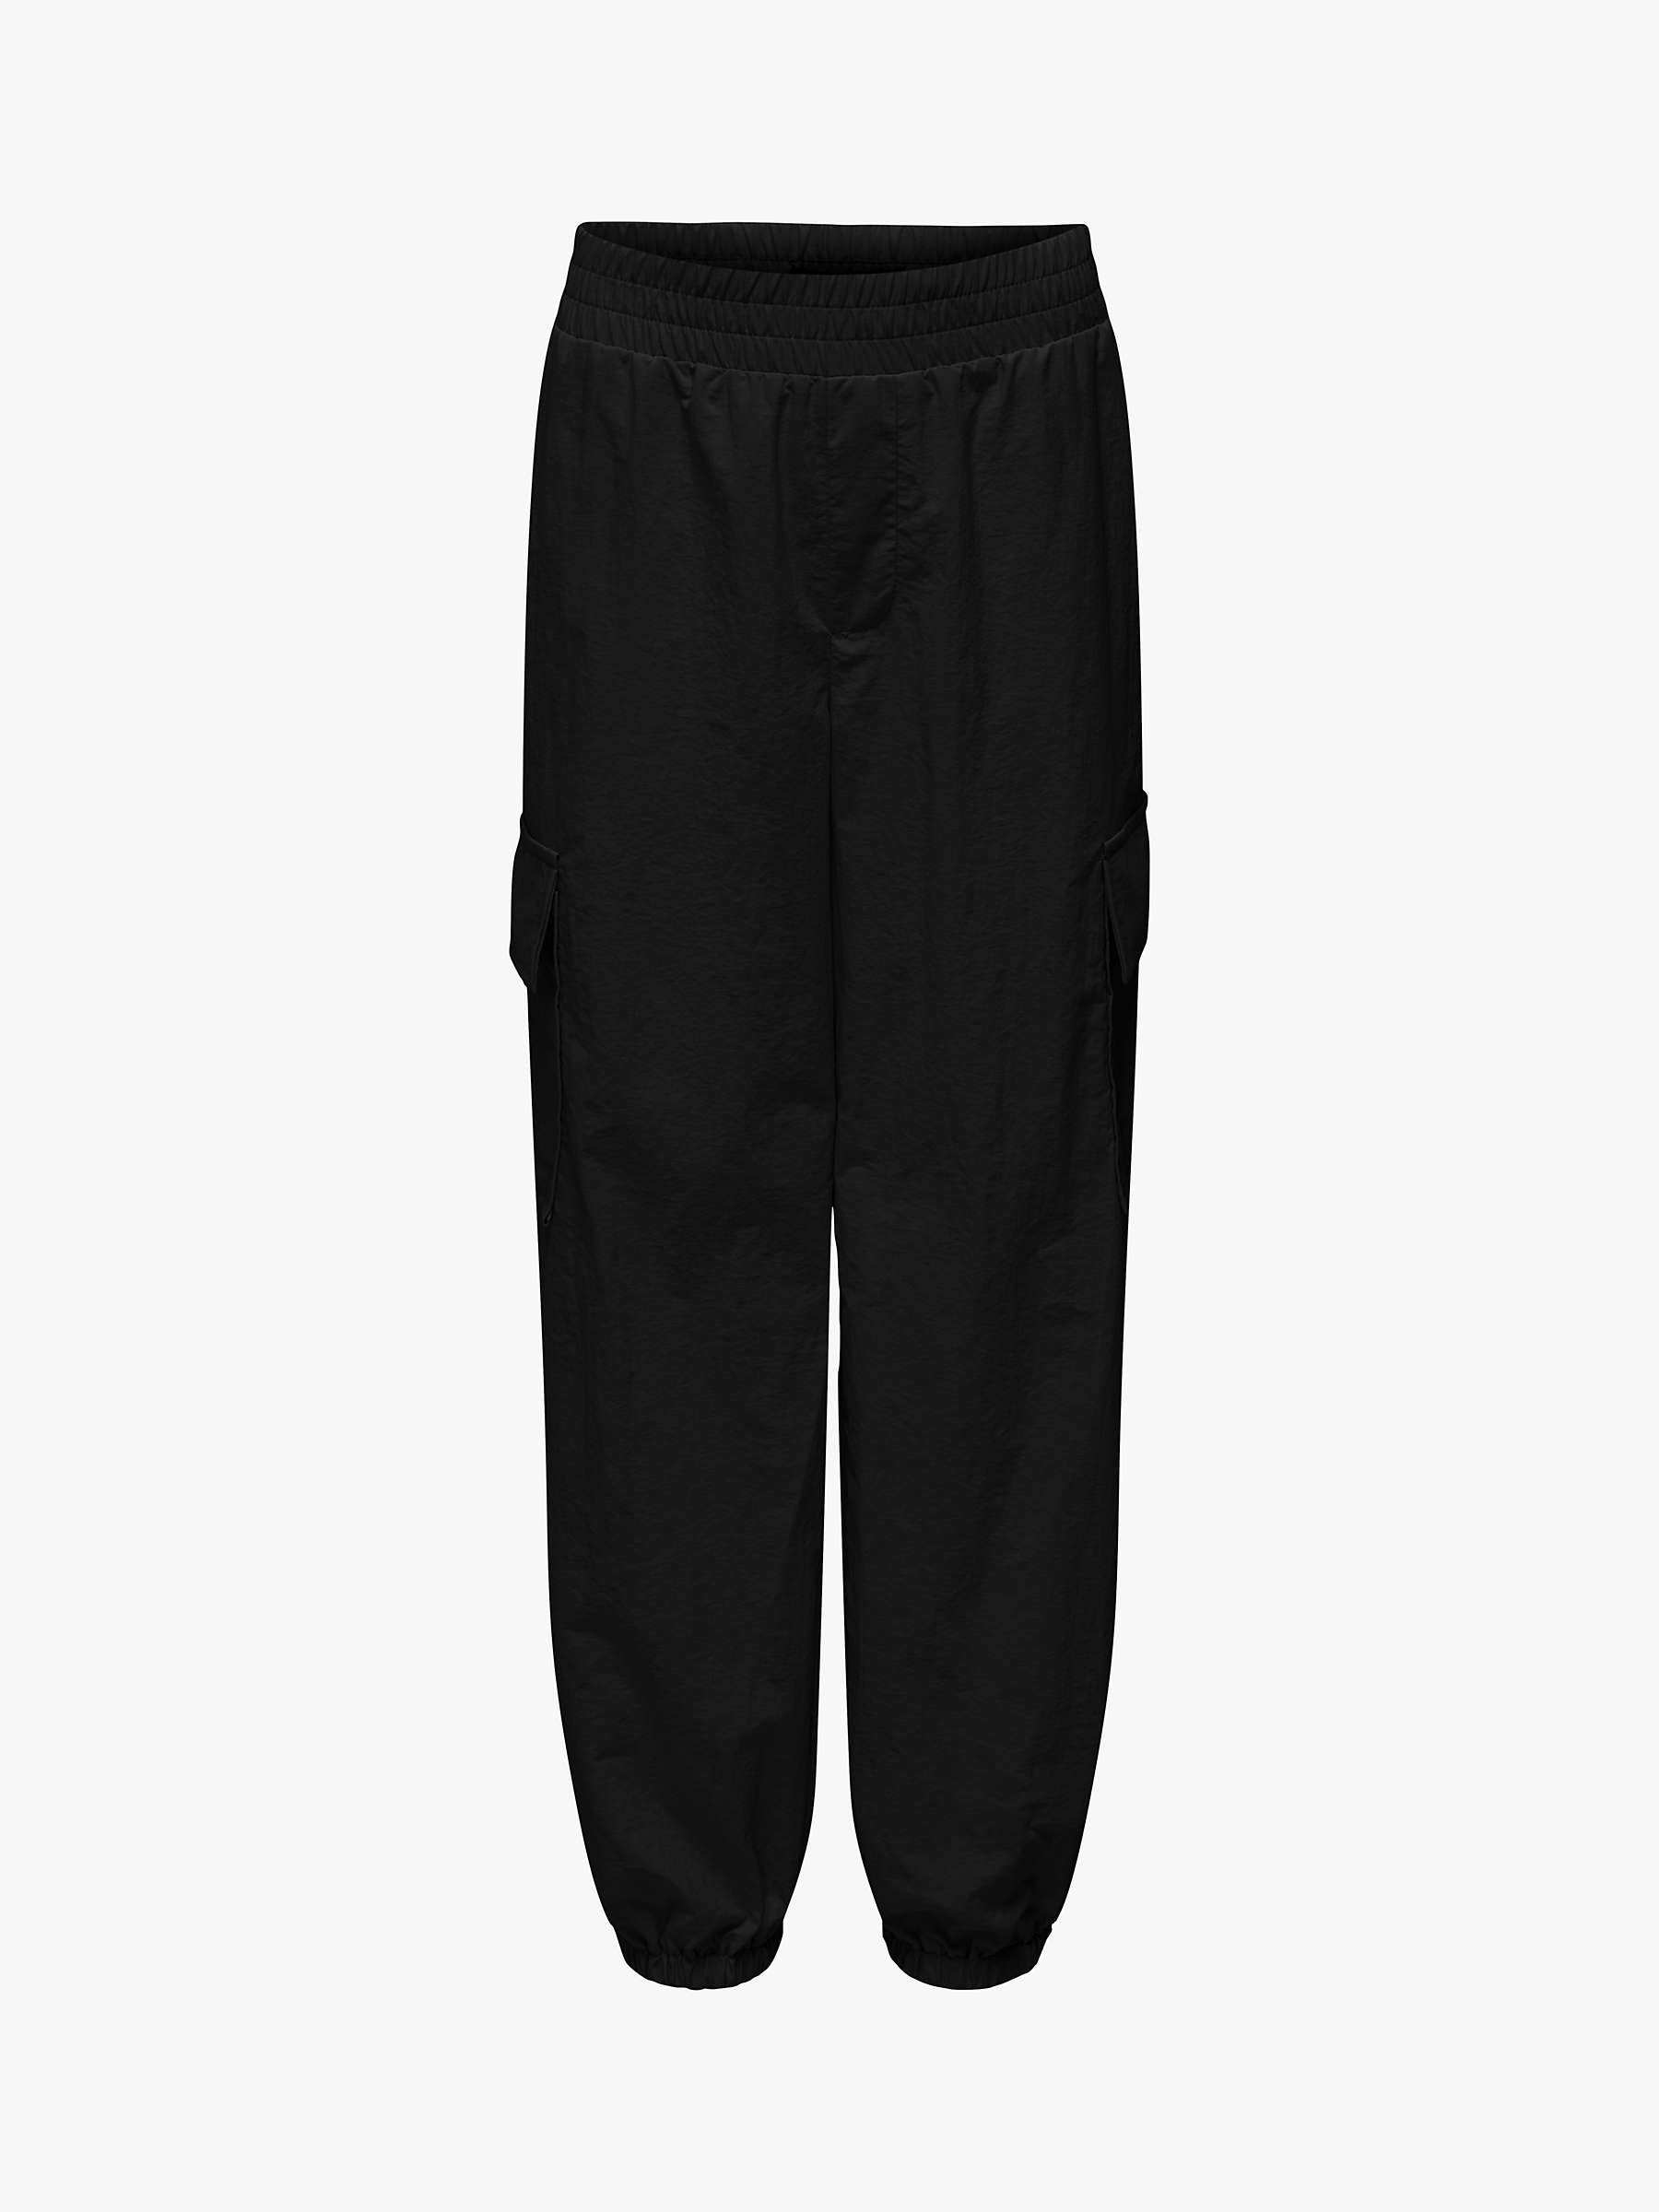 Buy Kids ONLY Kids' Cargo Trousers, Black Online at johnlewis.com